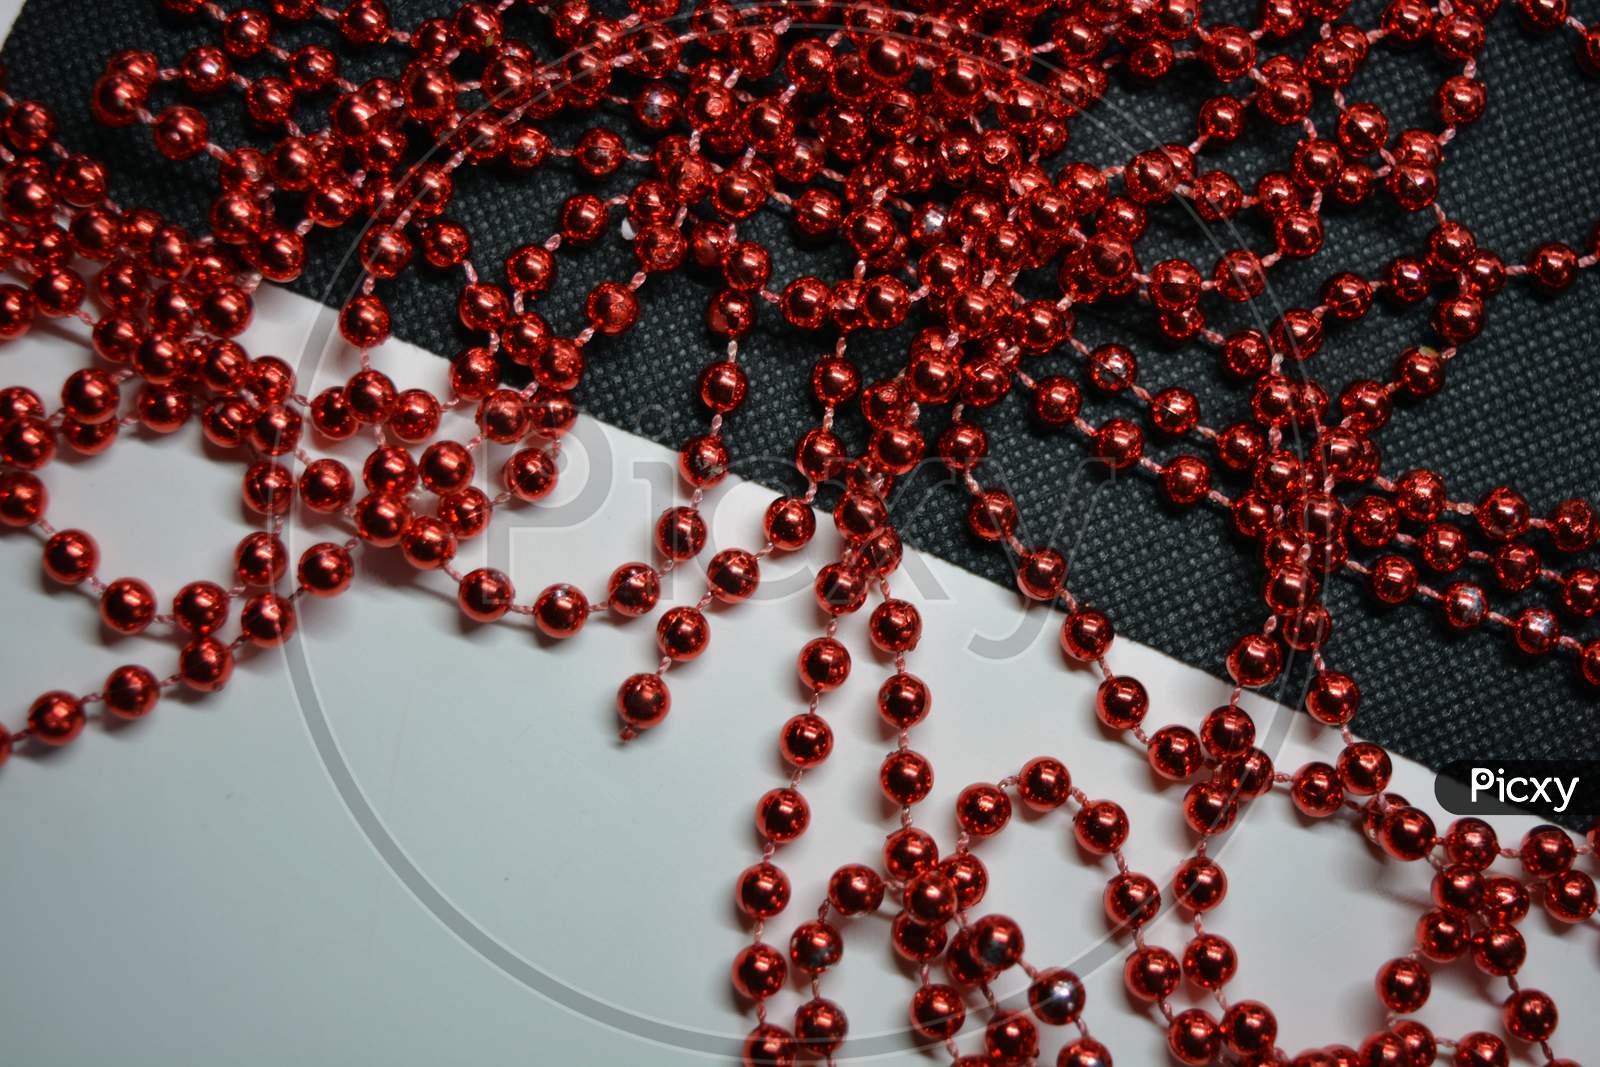 abstract, art, bead, beads, berry, celebration, christmas, coffee, color, concept, currant, day, decoration, design, detail, ed, fashion, food, frame, fruit, gift, glass, healthy, heart, holiday, illustration, jewelry, light, love, material, nature, necklace, ornament, pattern, people, red, reflecti